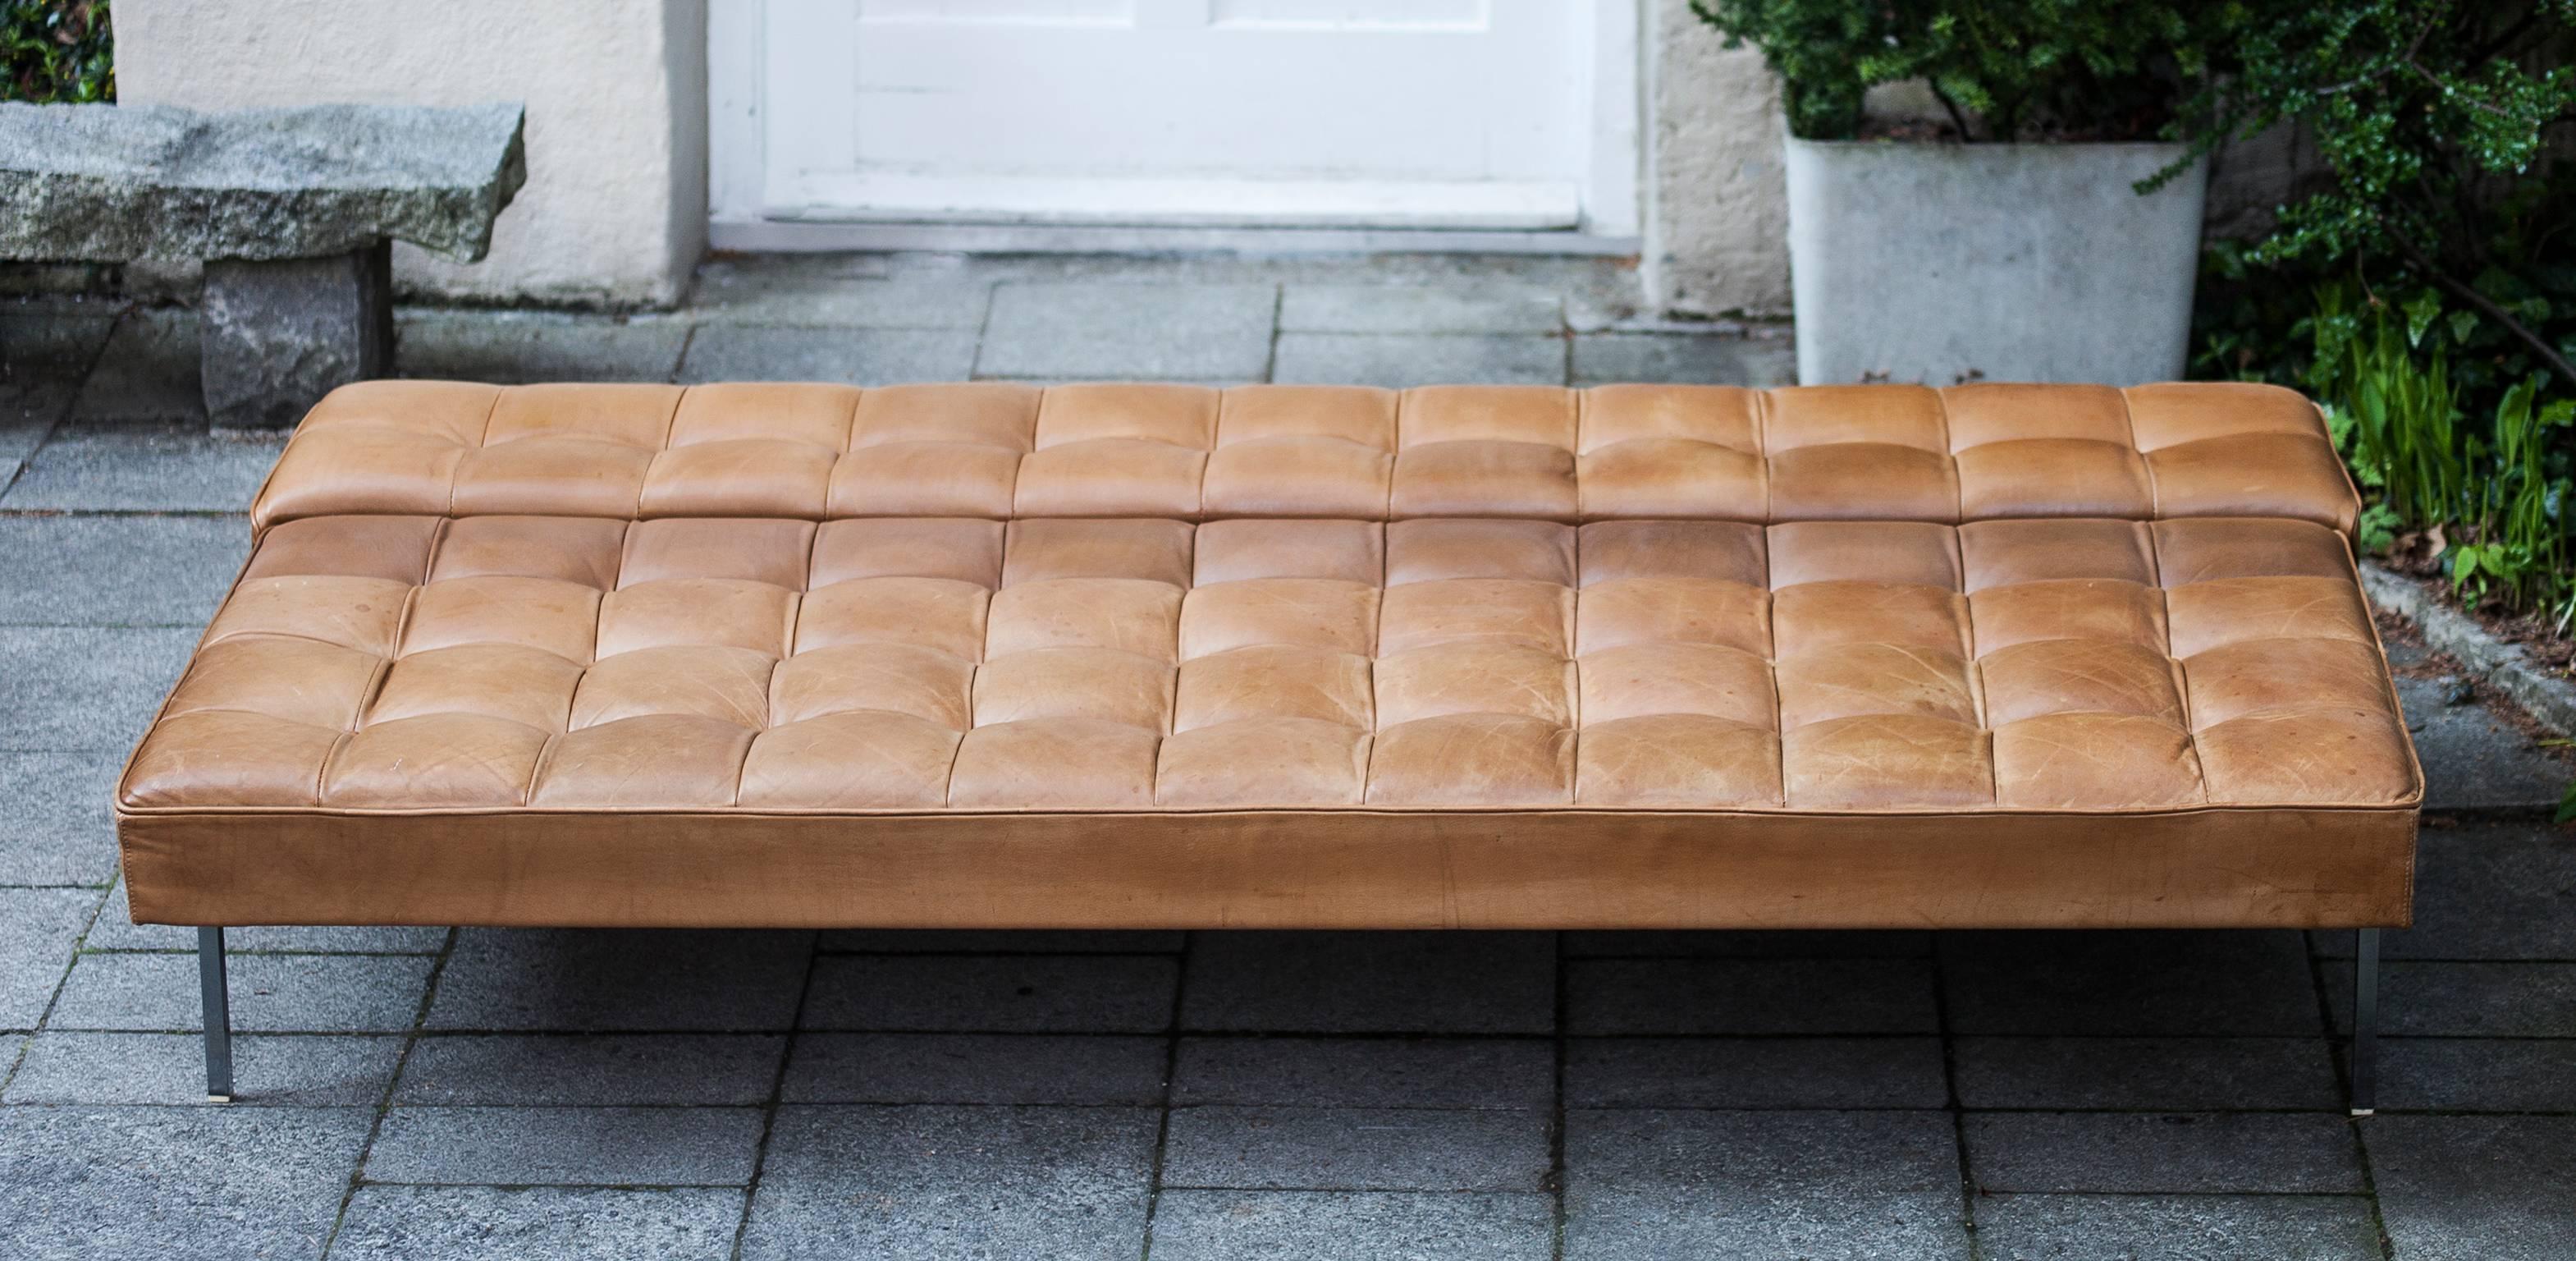 Fantastic sofa by Johannes Spalt and made by Wittmann, Austria, 1961. This rare early model, named 'Constanze in original nature leather, changing in a daybed, is based on a metal frame and is in very good vintage condition.
Three-seat / Daybed 198